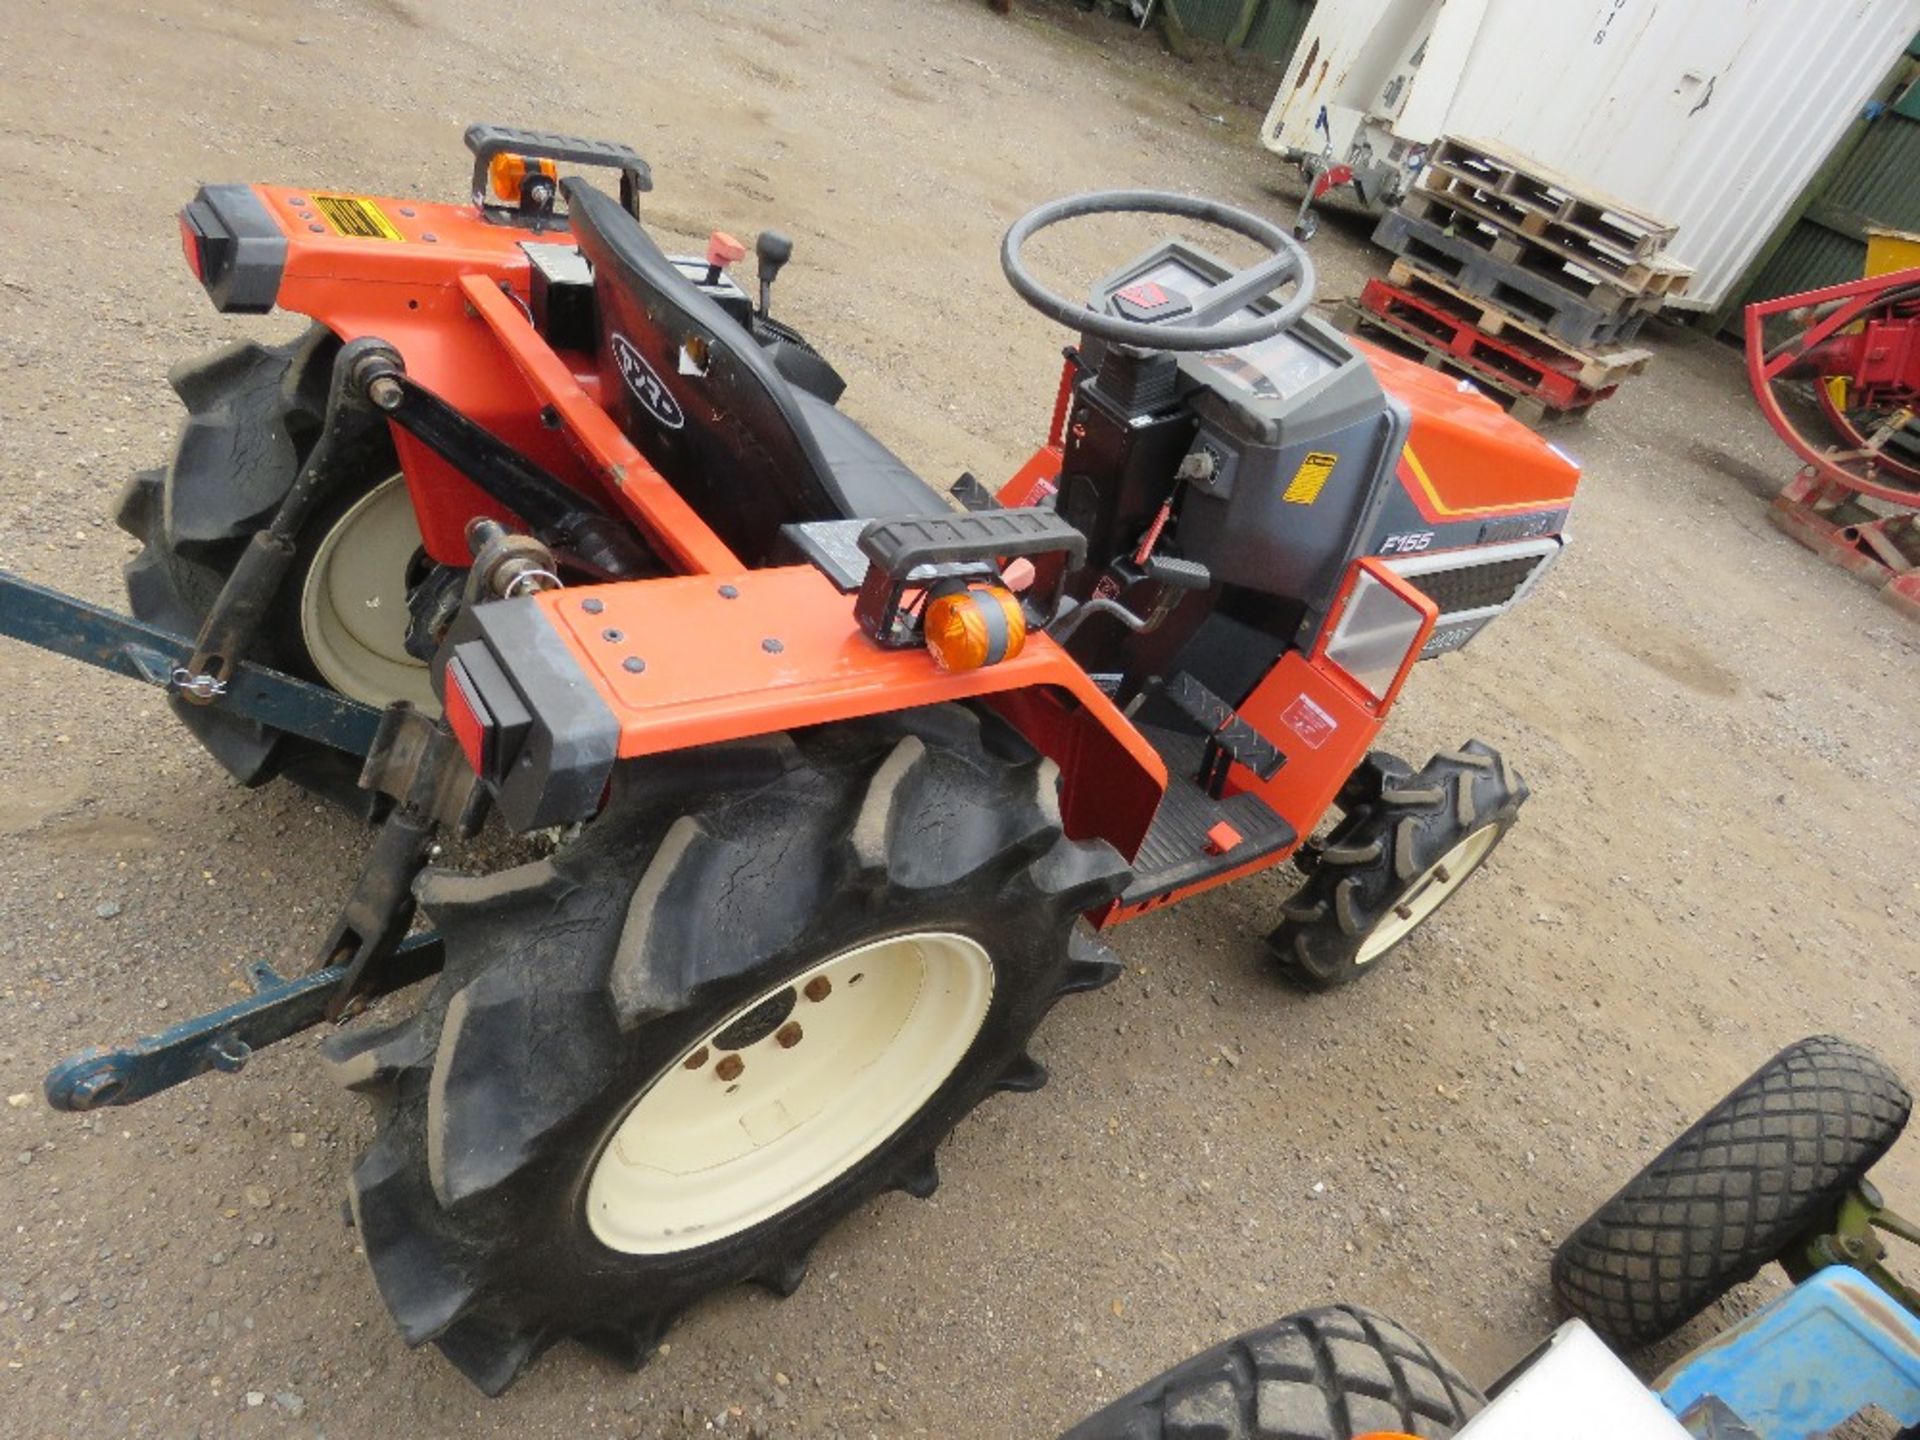 YANMAR F155 4WD COMPACT AGRICULTURAL TRACTOR WITH REAR LINK ARMS. WHEN TESTED WAS SEEN TO DRIVE, ST - Image 7 of 7